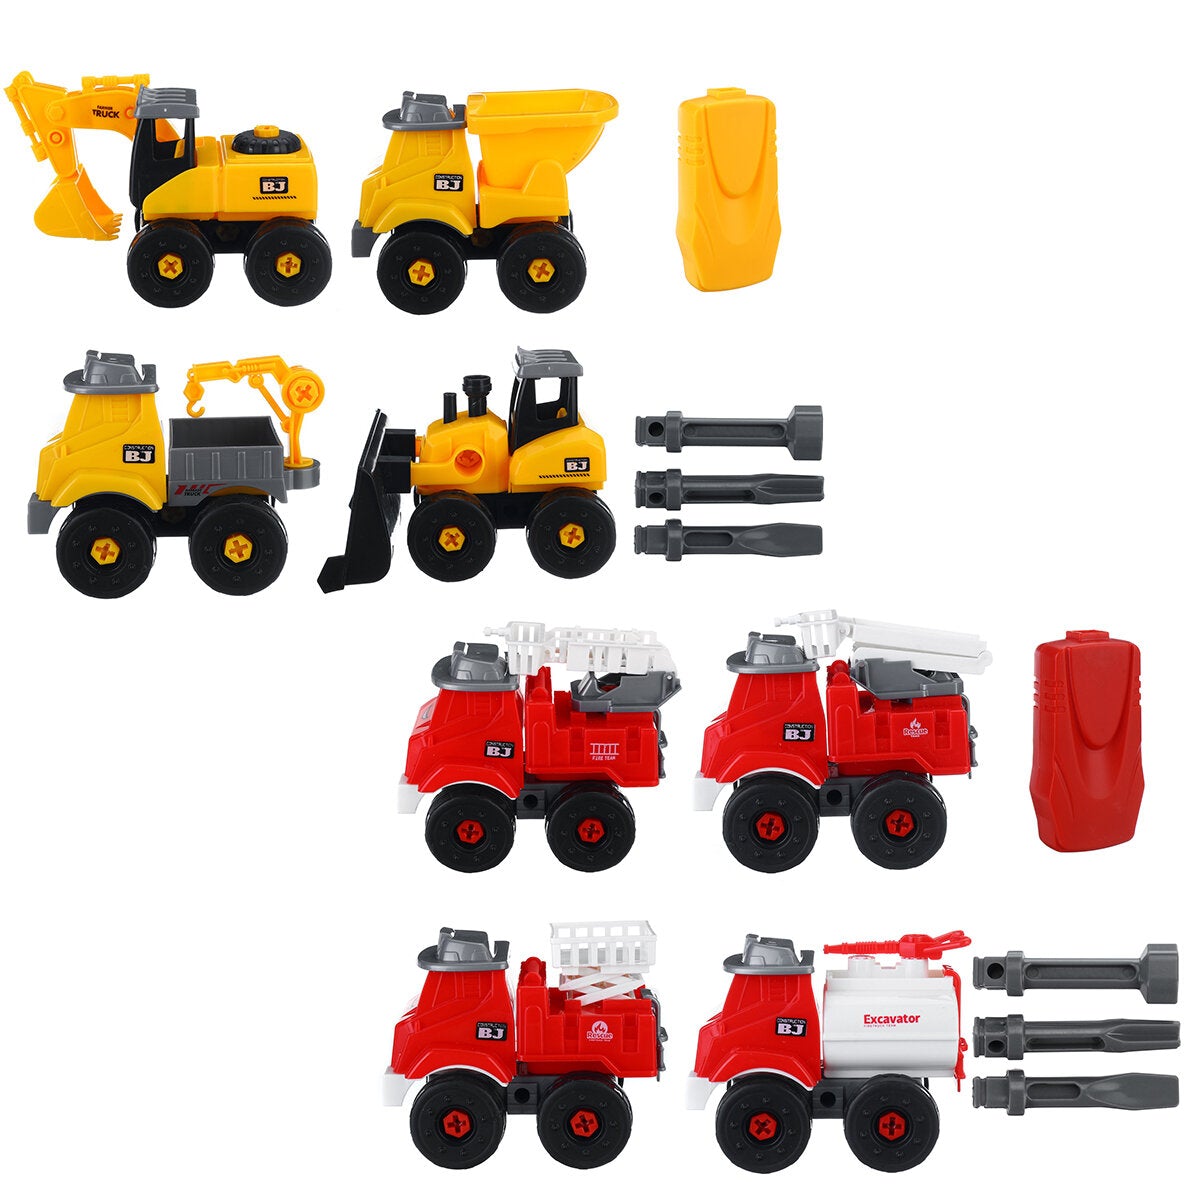 4 IN1 Truck Construction Sliding Vehicle Excavator Detachable Assembly Screw Nut Puzzle DIY Diecast Car Model Toy Set for Kids Gift